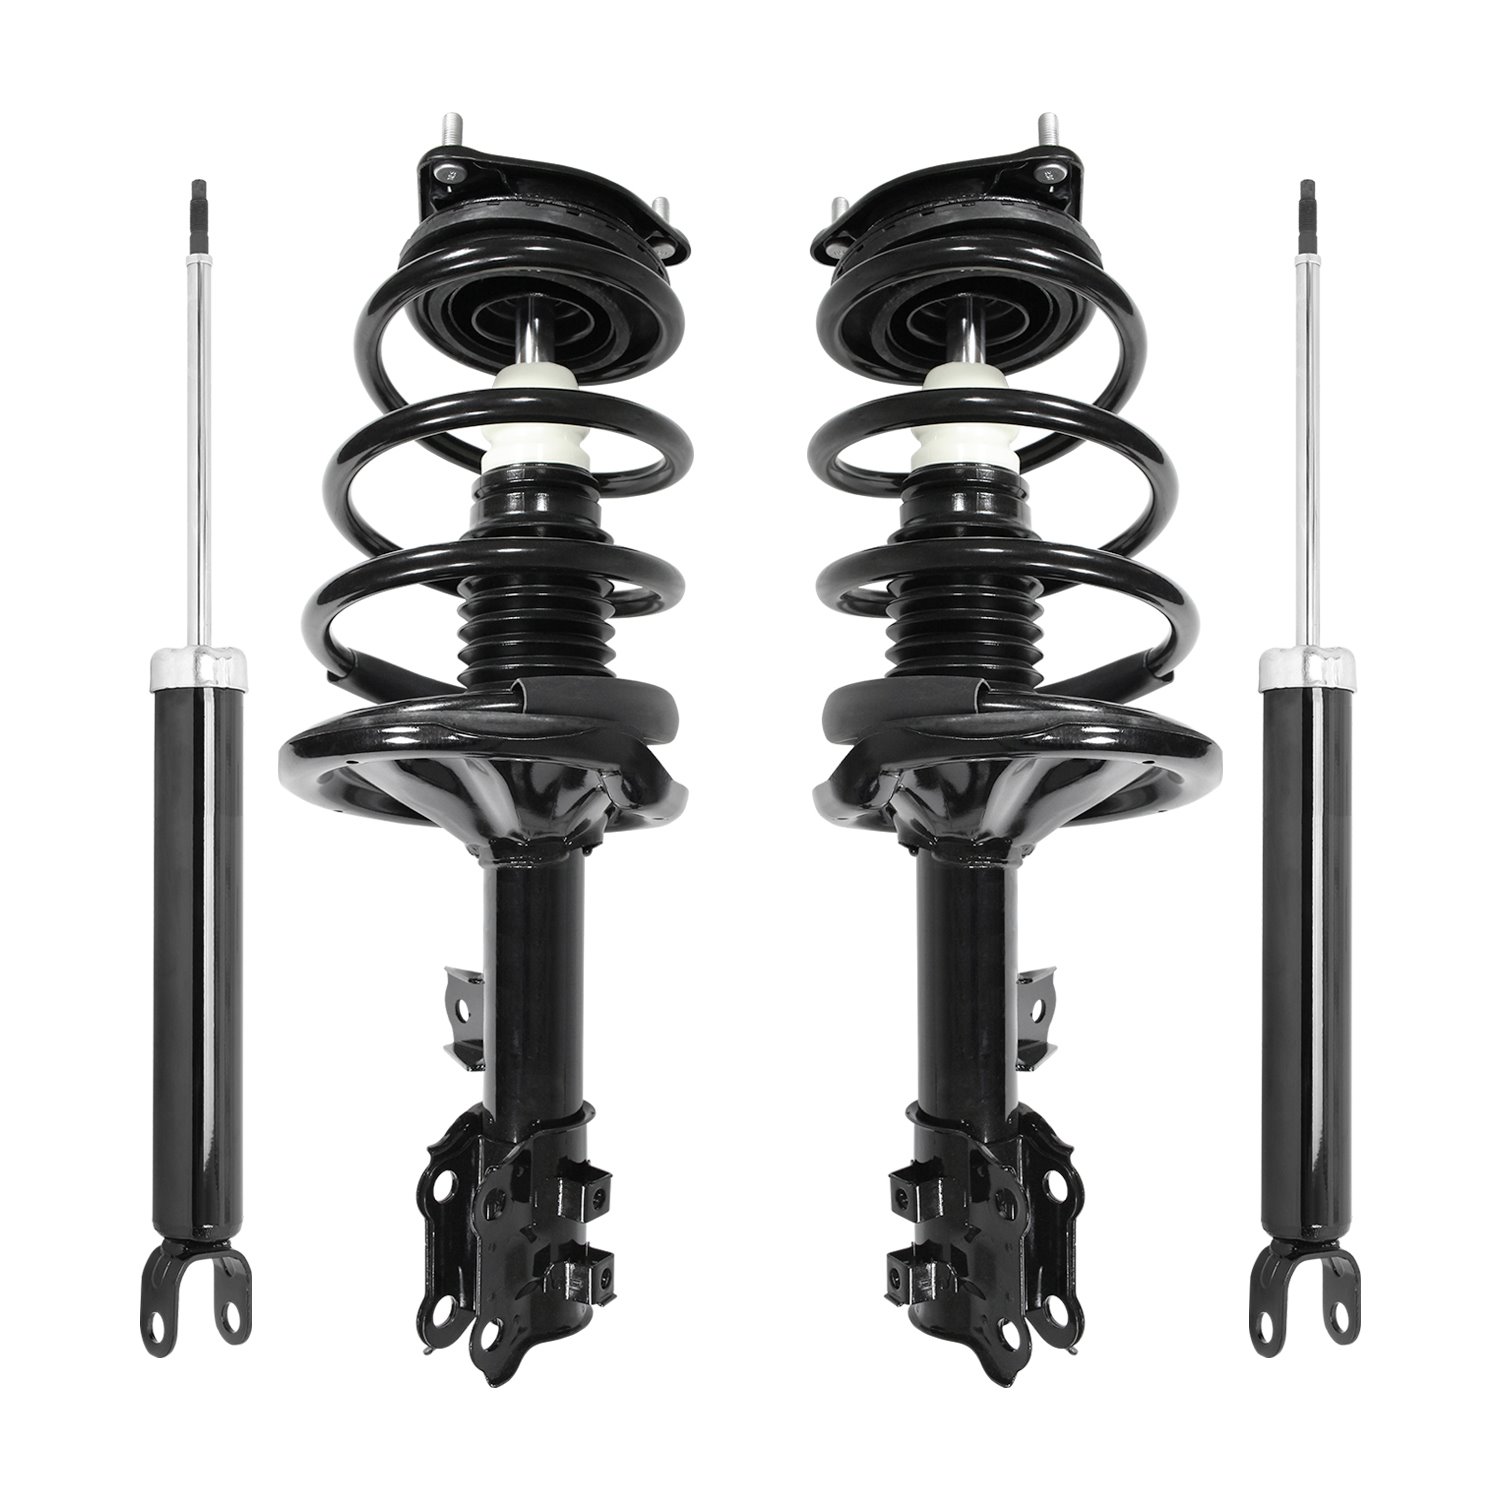 4-11133-259890-001 Front & Rear Suspension Strut & Coil Spring Assembly Fits Select Hyundai Elantra